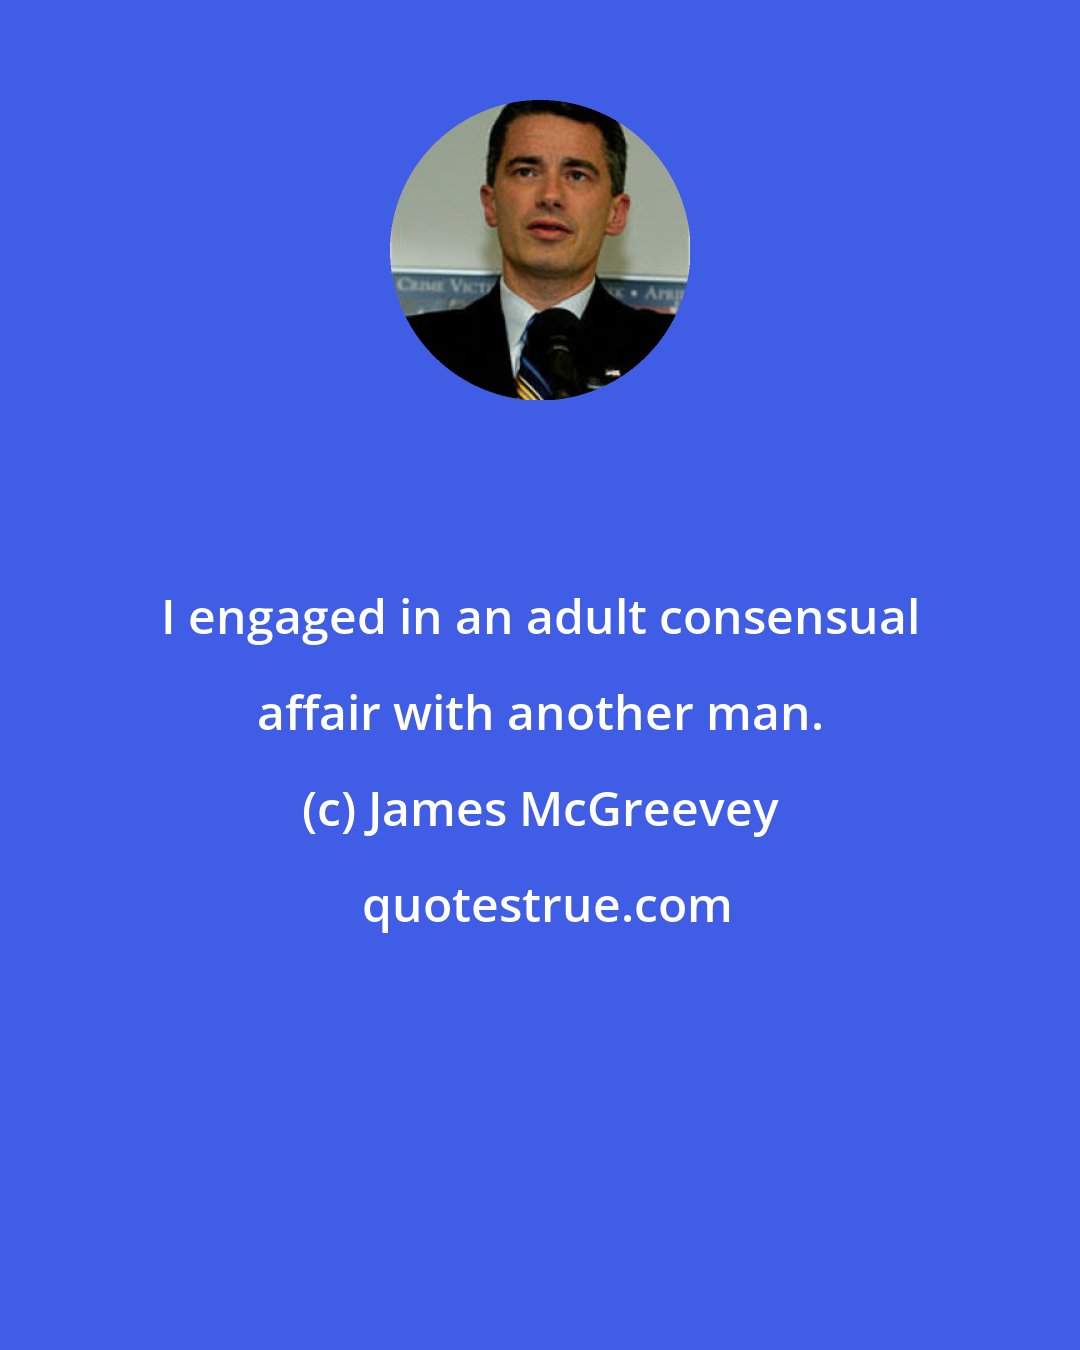 James McGreevey: I engaged in an adult consensual affair with another man.